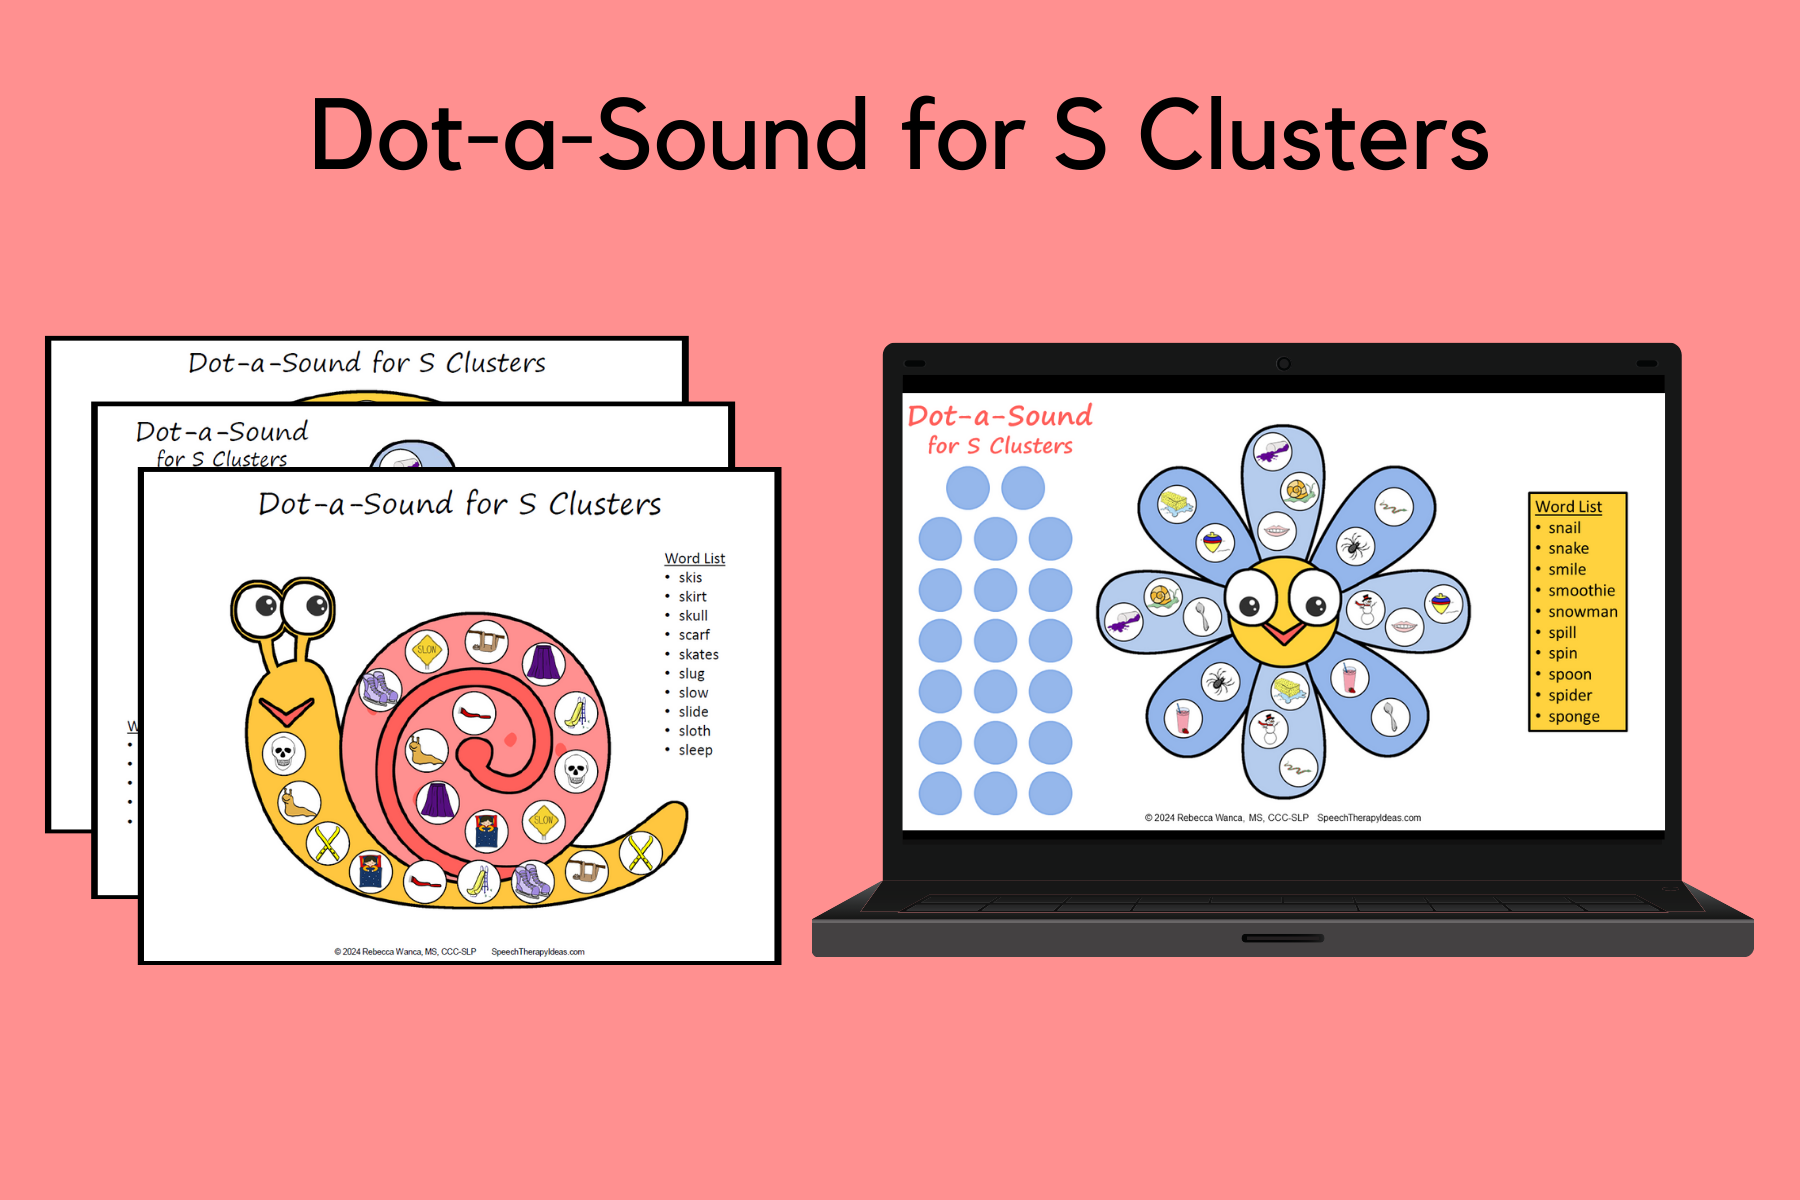 Dot-a-Sound for S Clusters